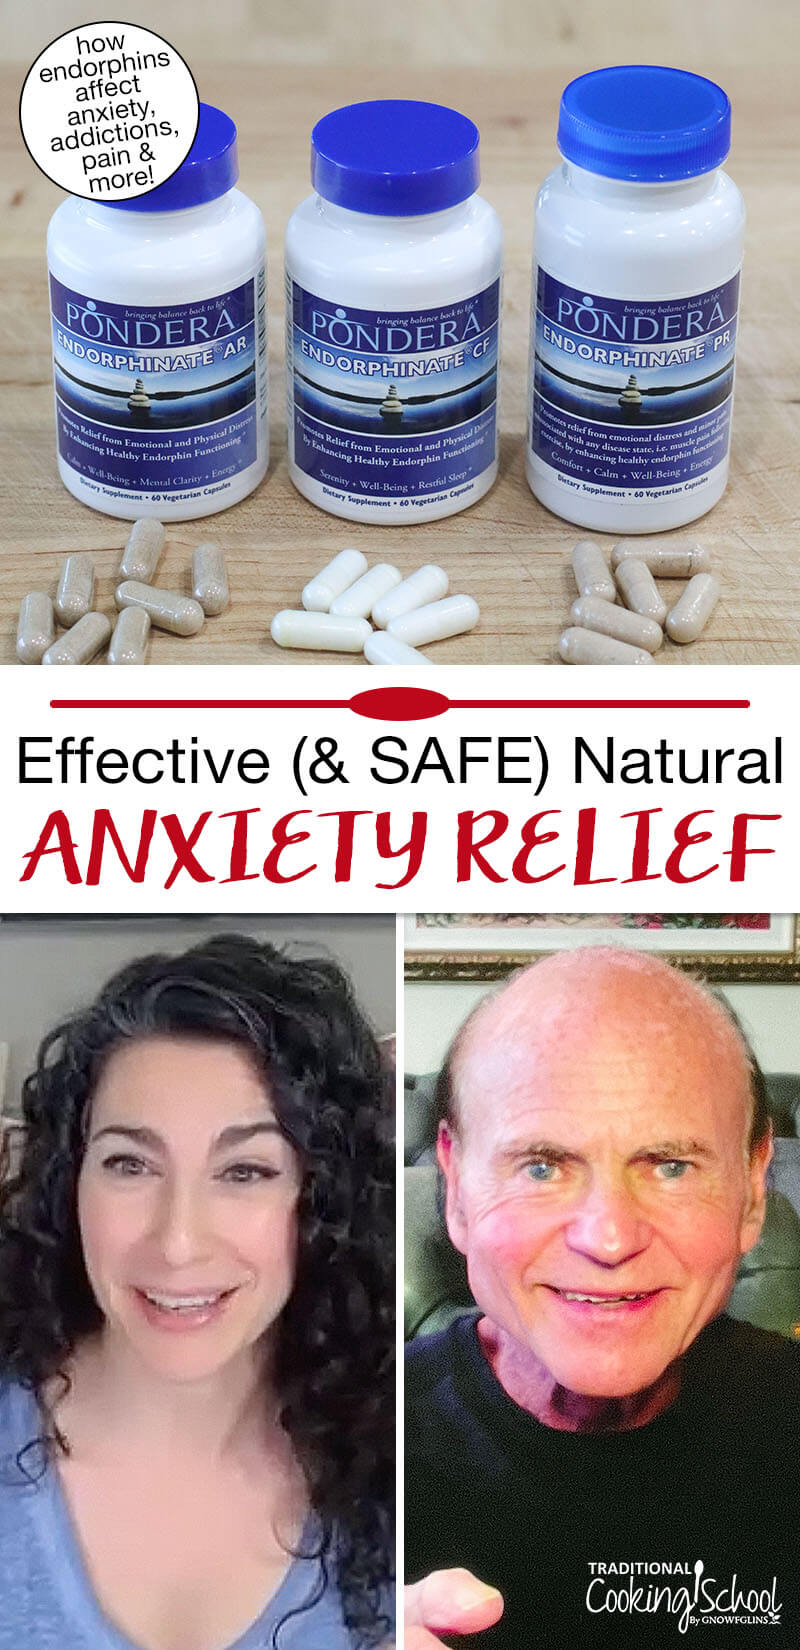 Photo collage of three supplement bottles from Pondera Pharmaceuticals for natural anxiety and pain relief; and a smiling woman interviewing Dr. Steven Crain. Text overlay says: "Effective (& Safe) Natural Anxiety Relief (how endorphins affect anxiety, addictions, pain & more!)"